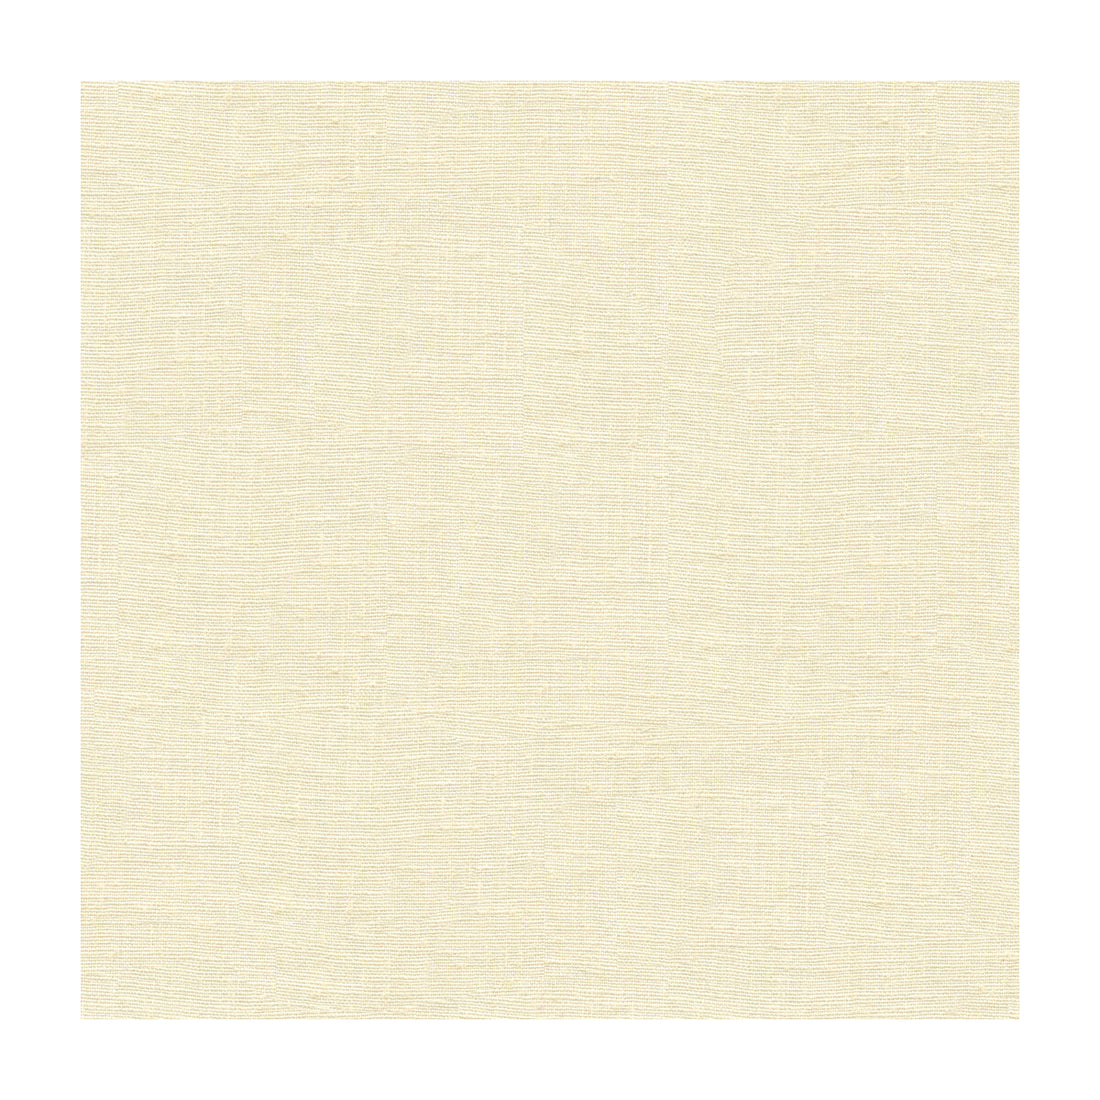 Dublin Linen fabric in cream color - pattern 2012175.111.0 - by Lee Jofa in the Colour Complements II collection